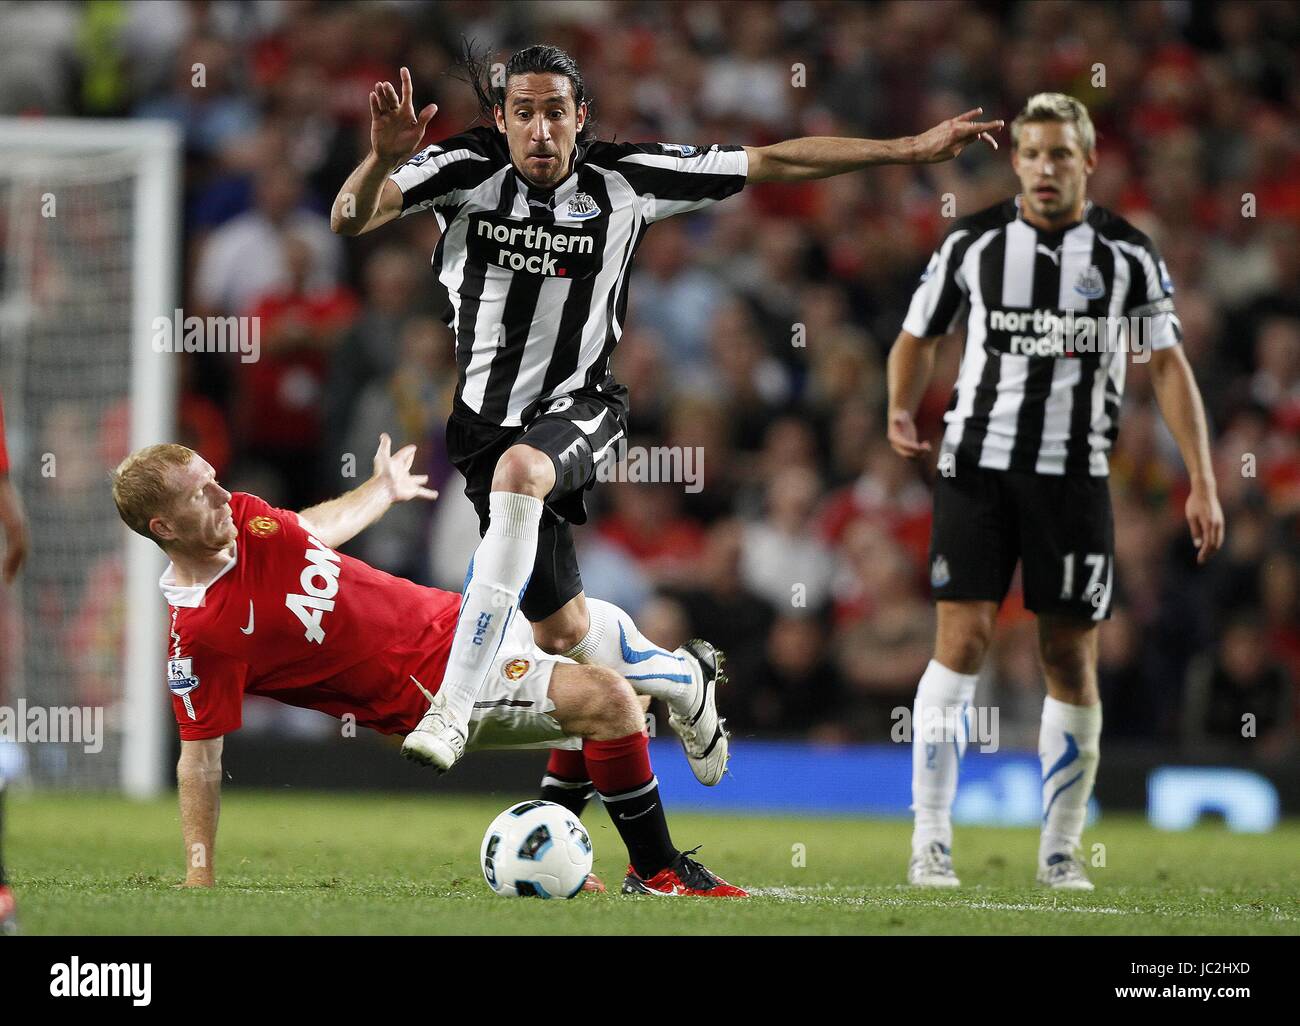 PAUL SCHOLES TACKLES JONAS GUT MANCHESTER UNITED V NEWCASTLE OLD TRAFFORD MANCHESTER ENGLAND 16. August 2010 Stockfoto